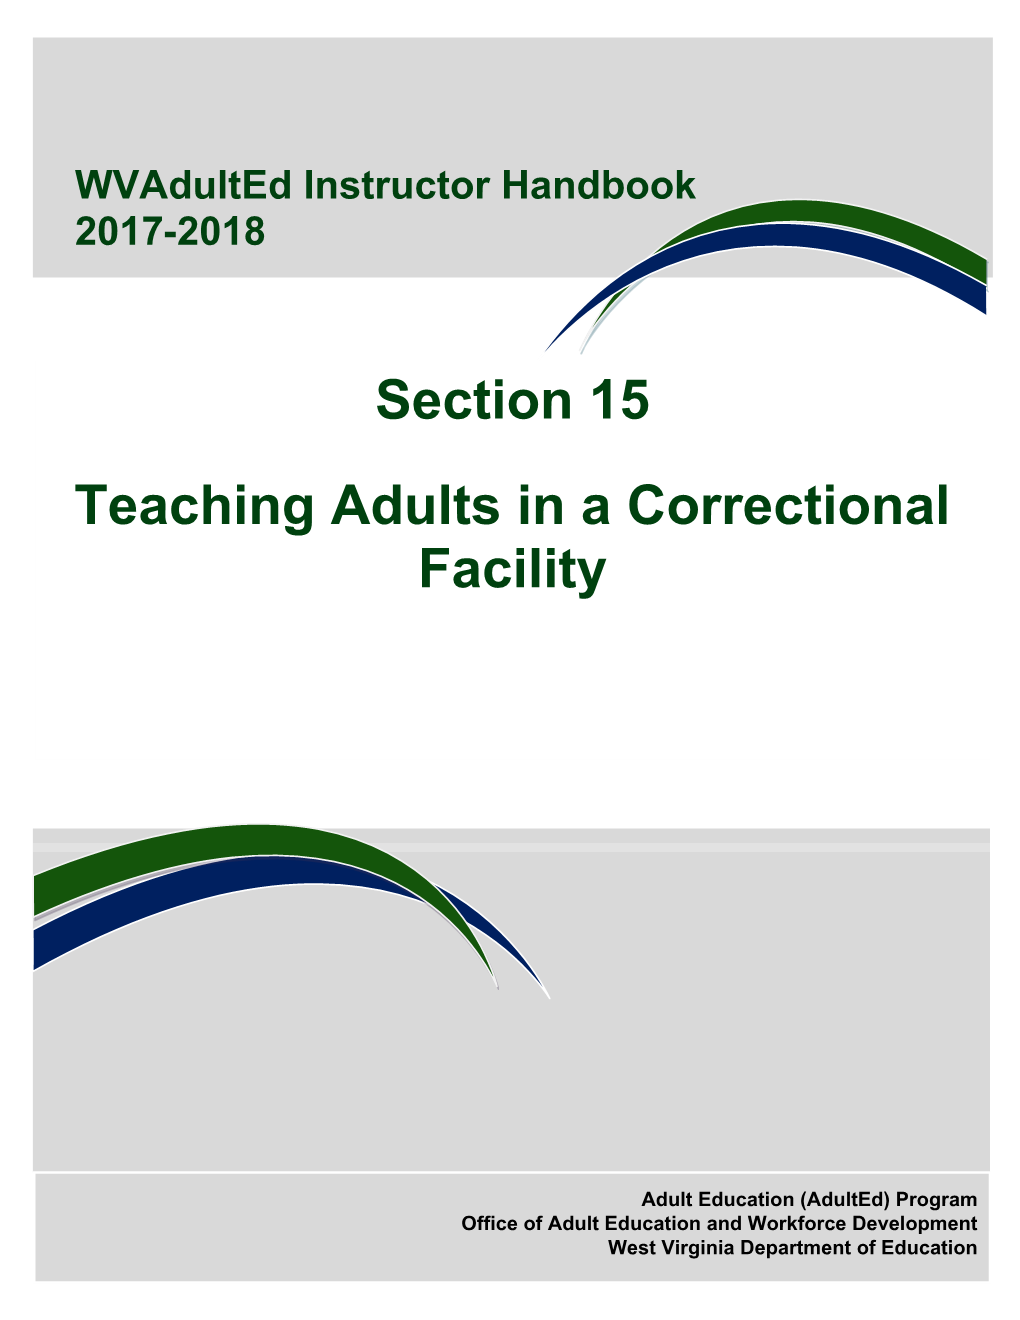 Teaching Adults in a Correctional Facility